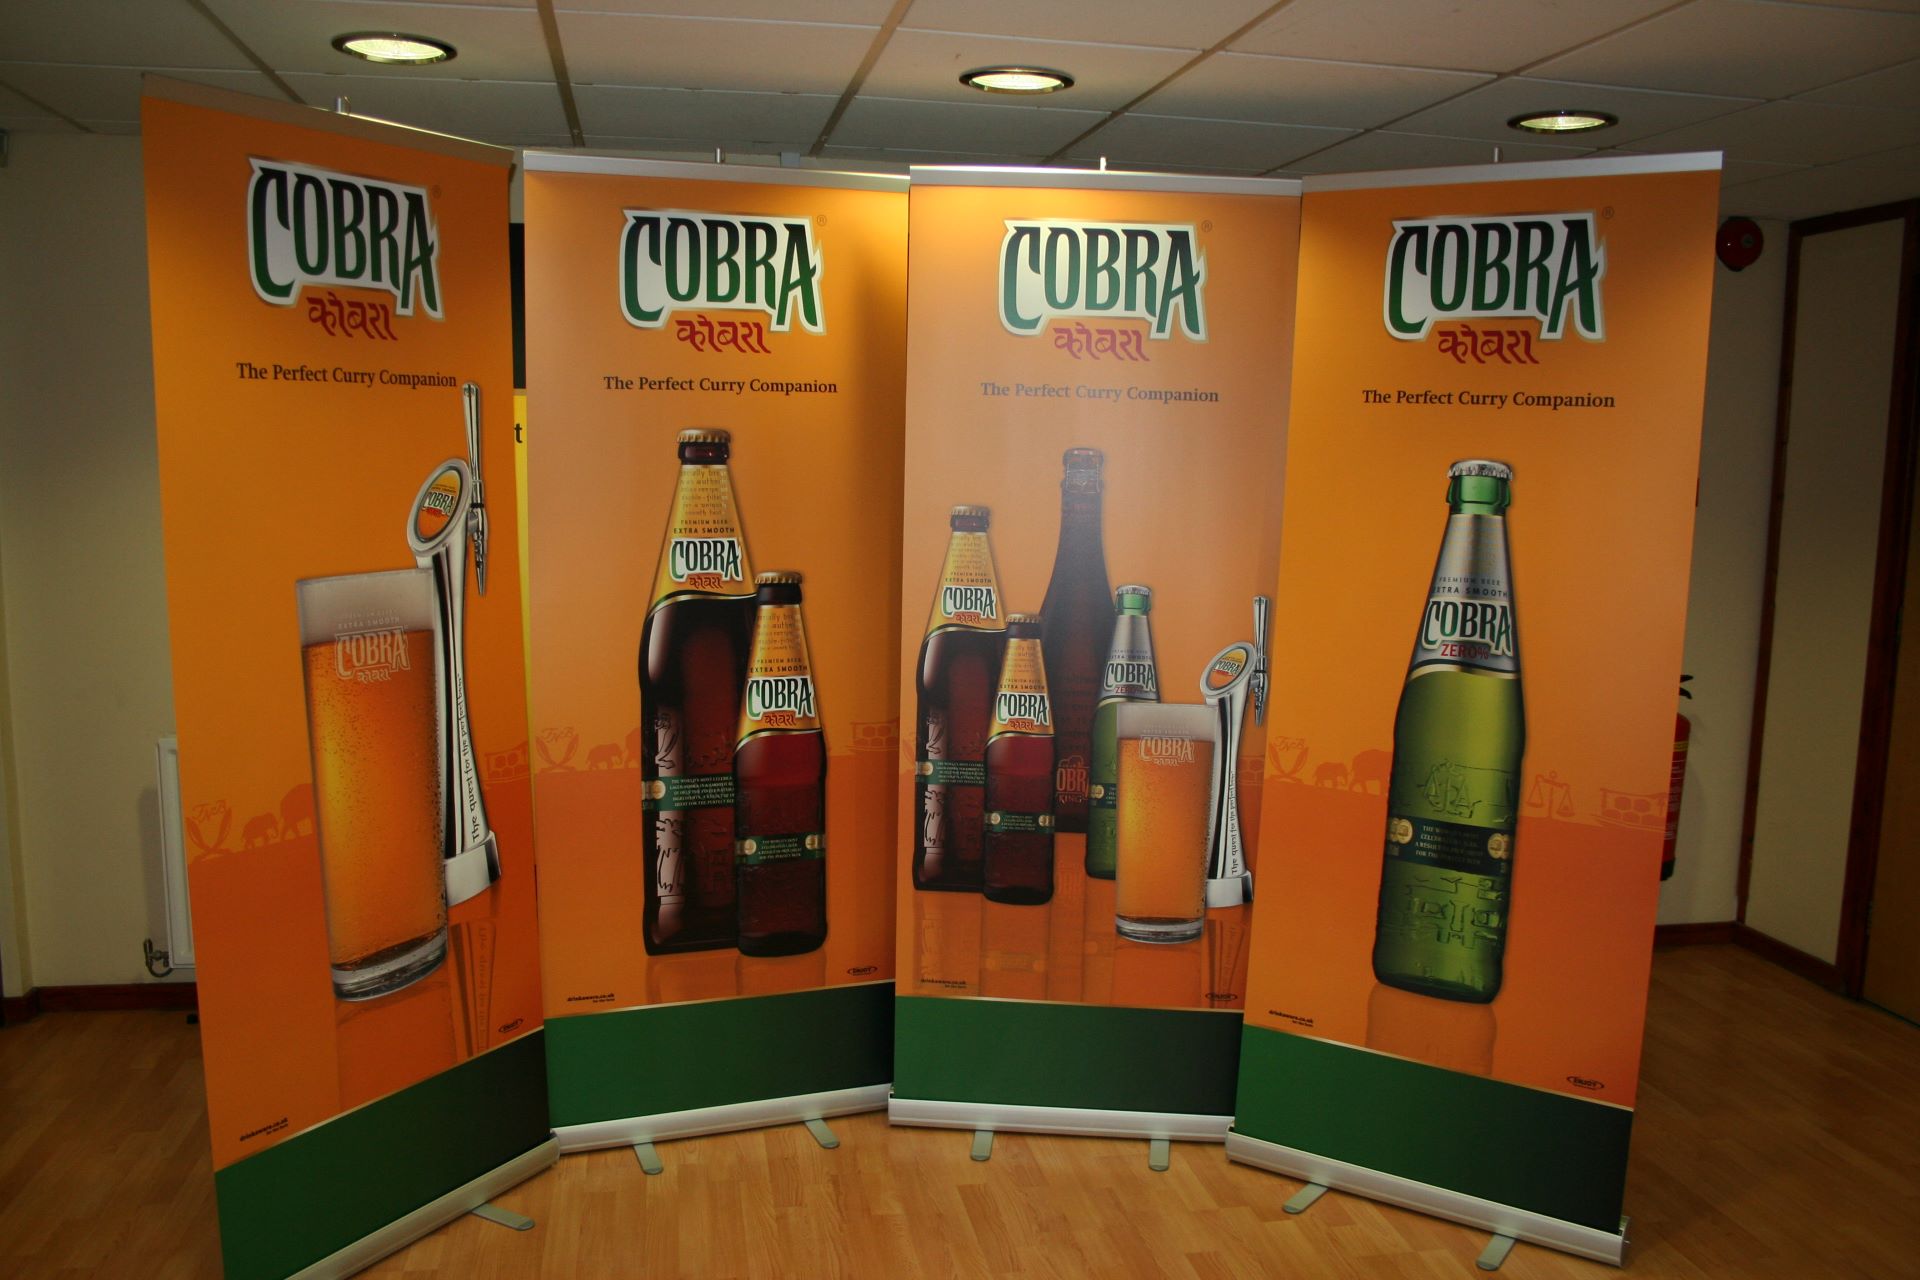 roller banners uk, our in-house team designed these roller banners for one of our well-known clients.